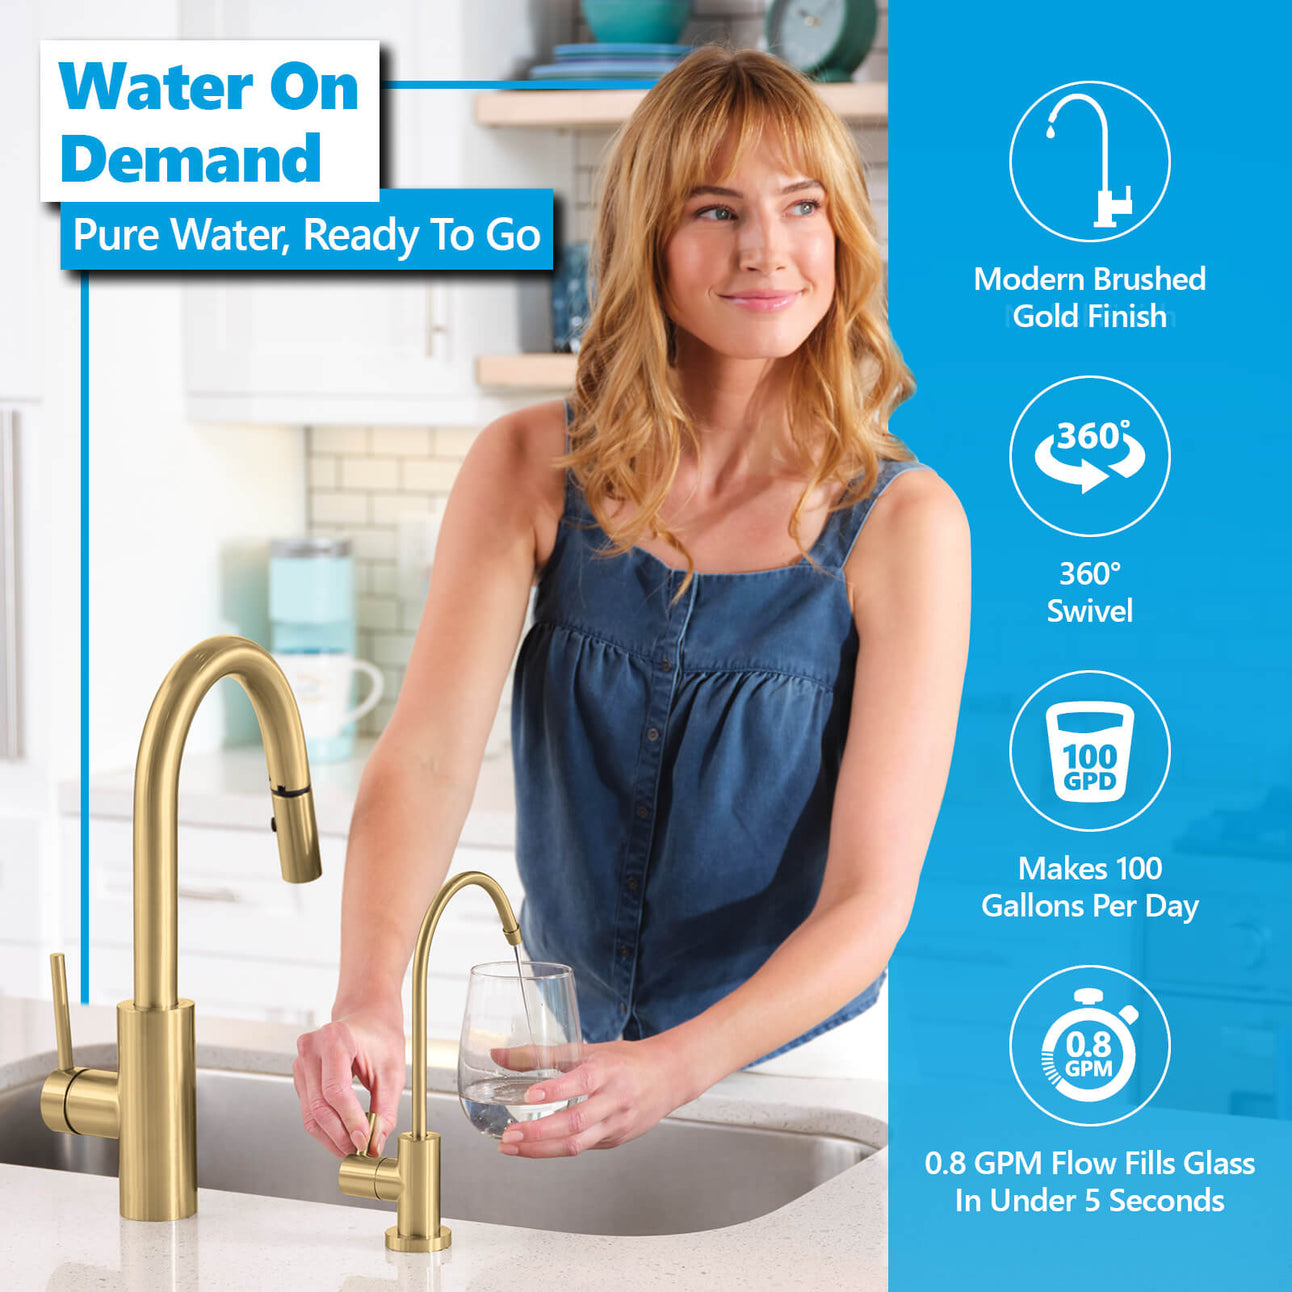 Deionization RO System with modern brushed gold faucet